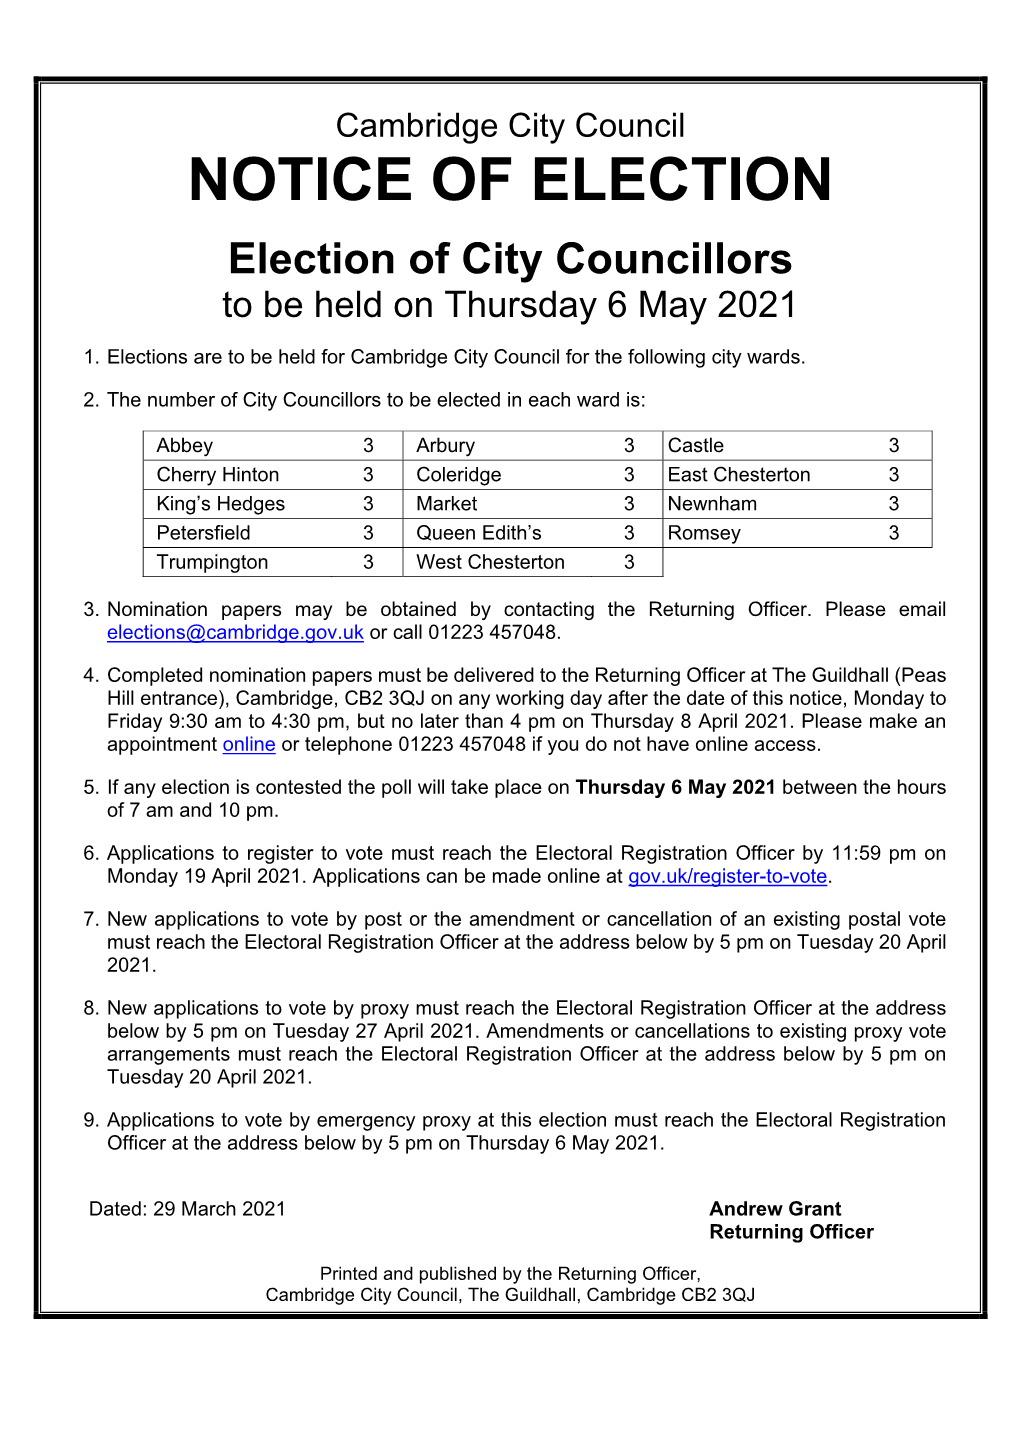 NOTICE of ELECTION Election of City Councillors to Be Held on Thursday 6 May 2021